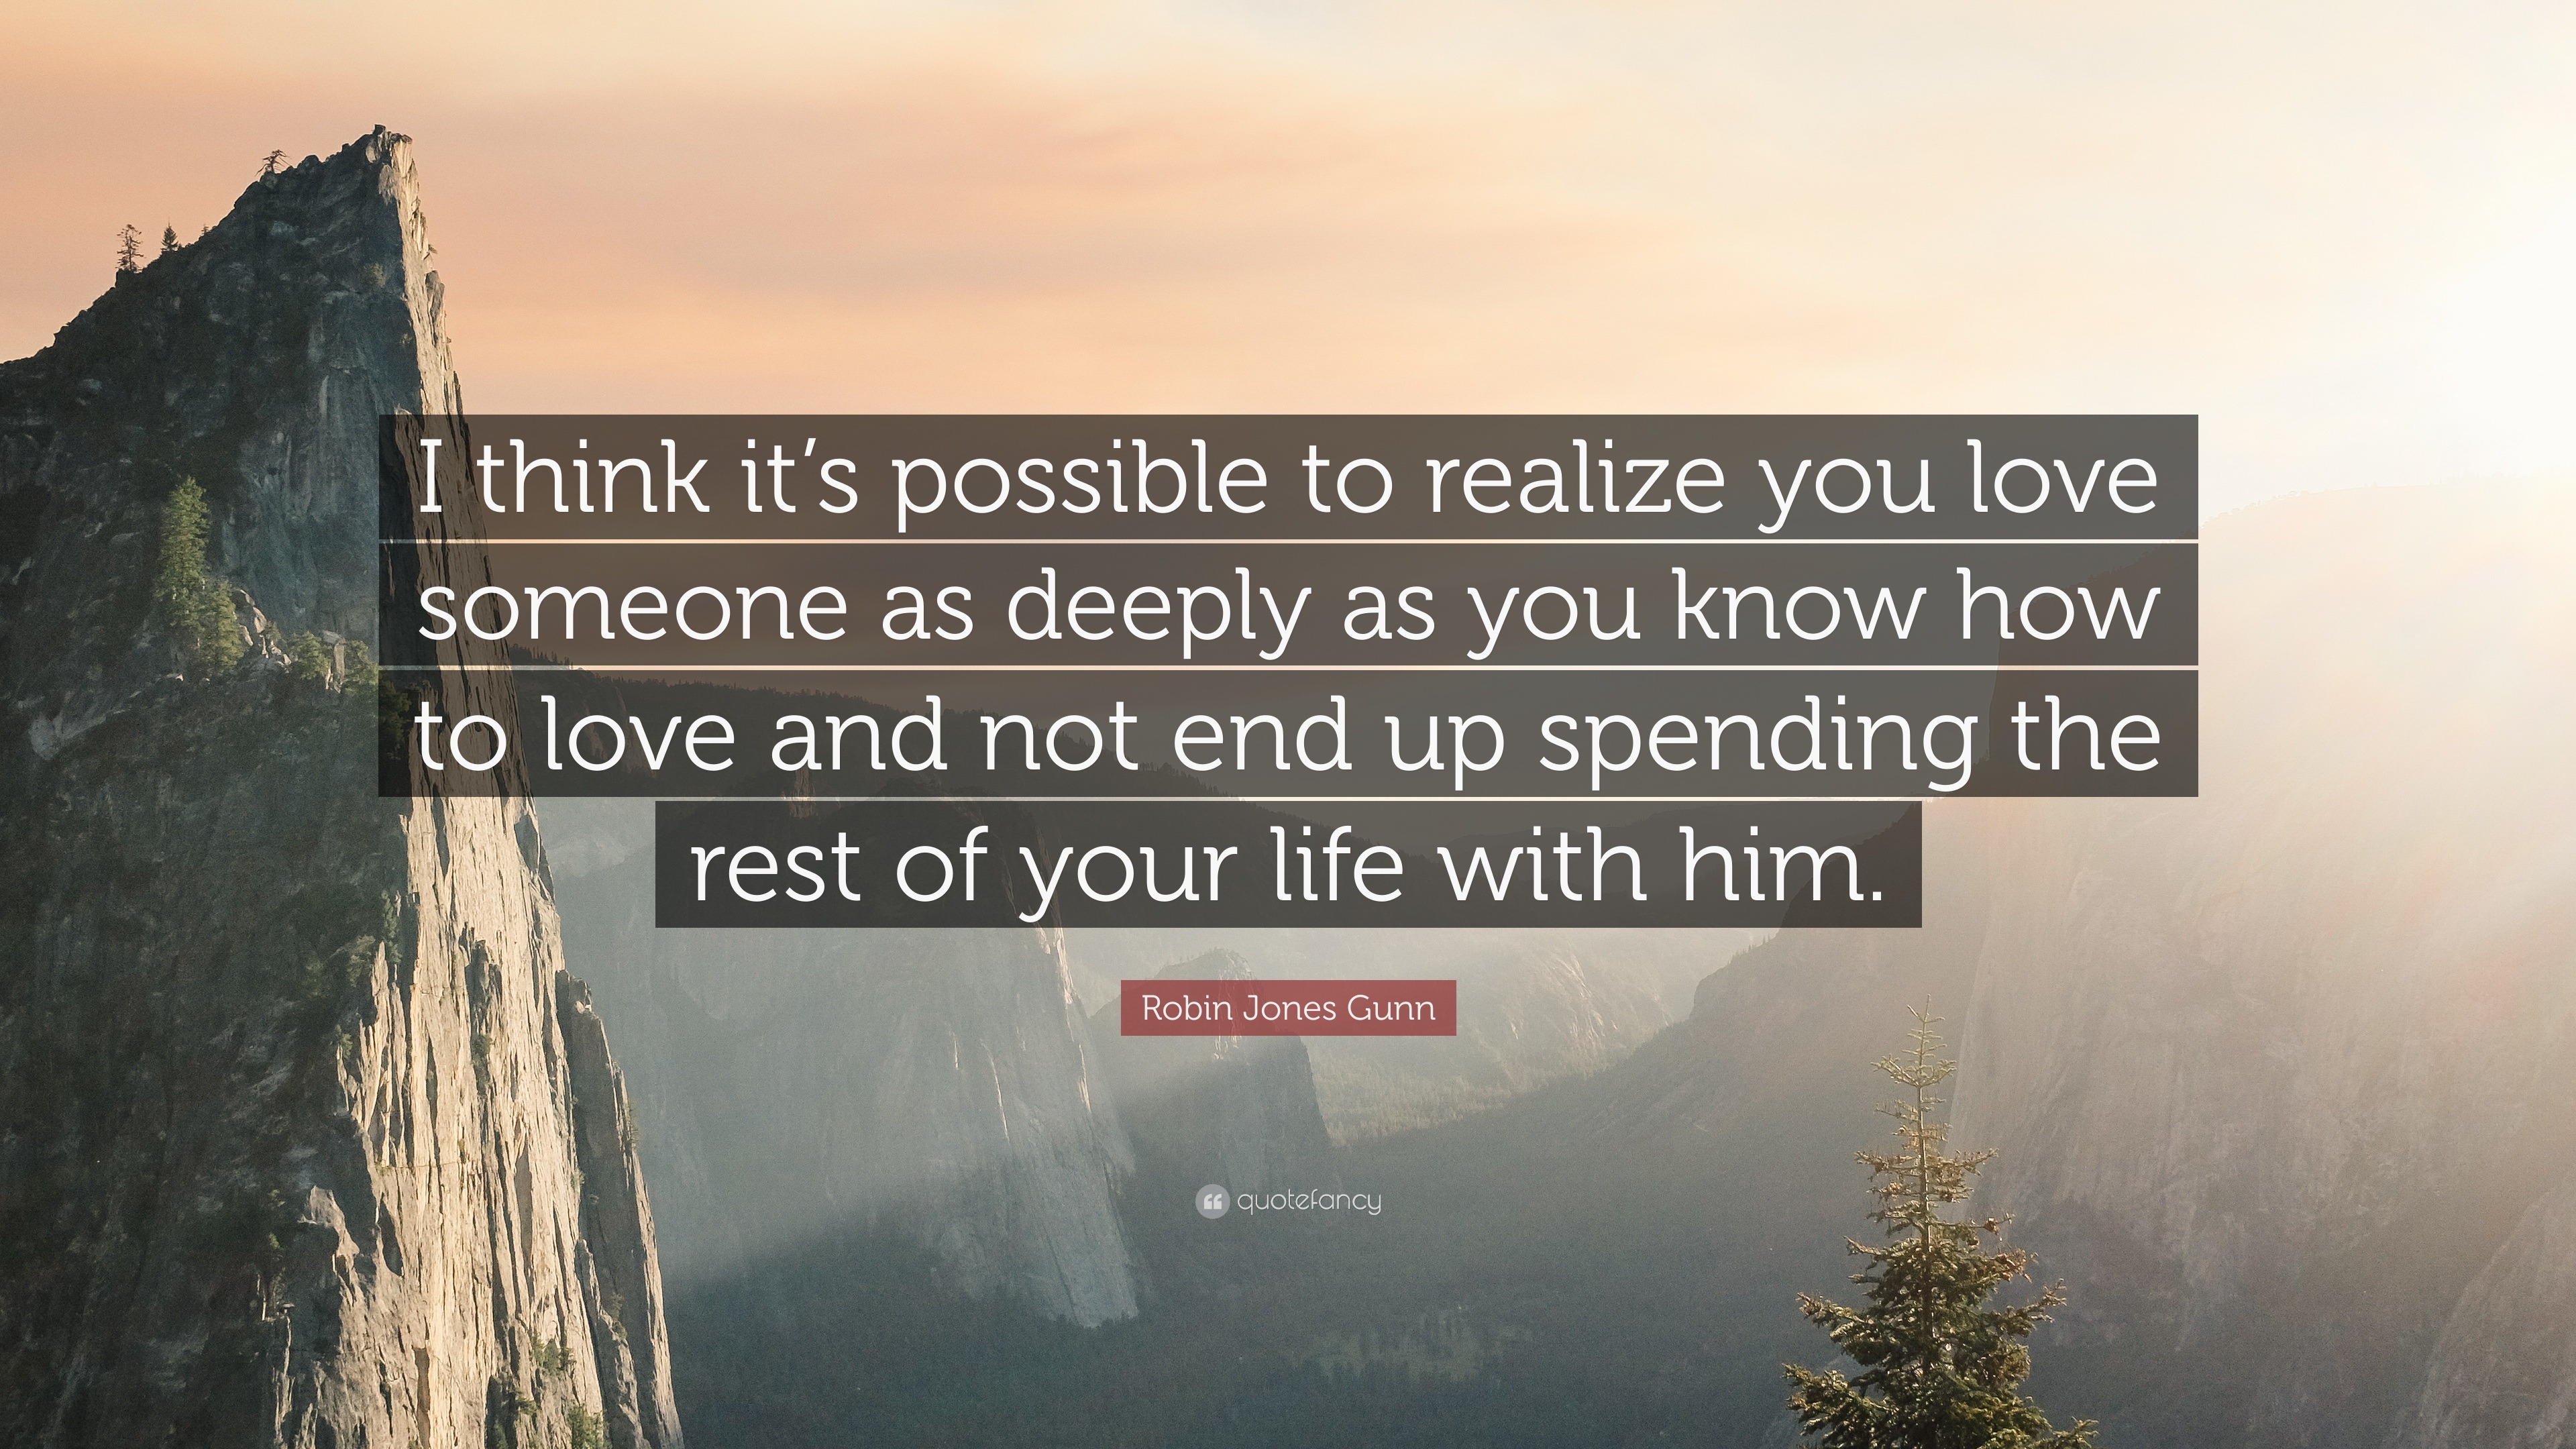 Robin Jones Gunn Quote: “I think it’s possible to realize you love ...